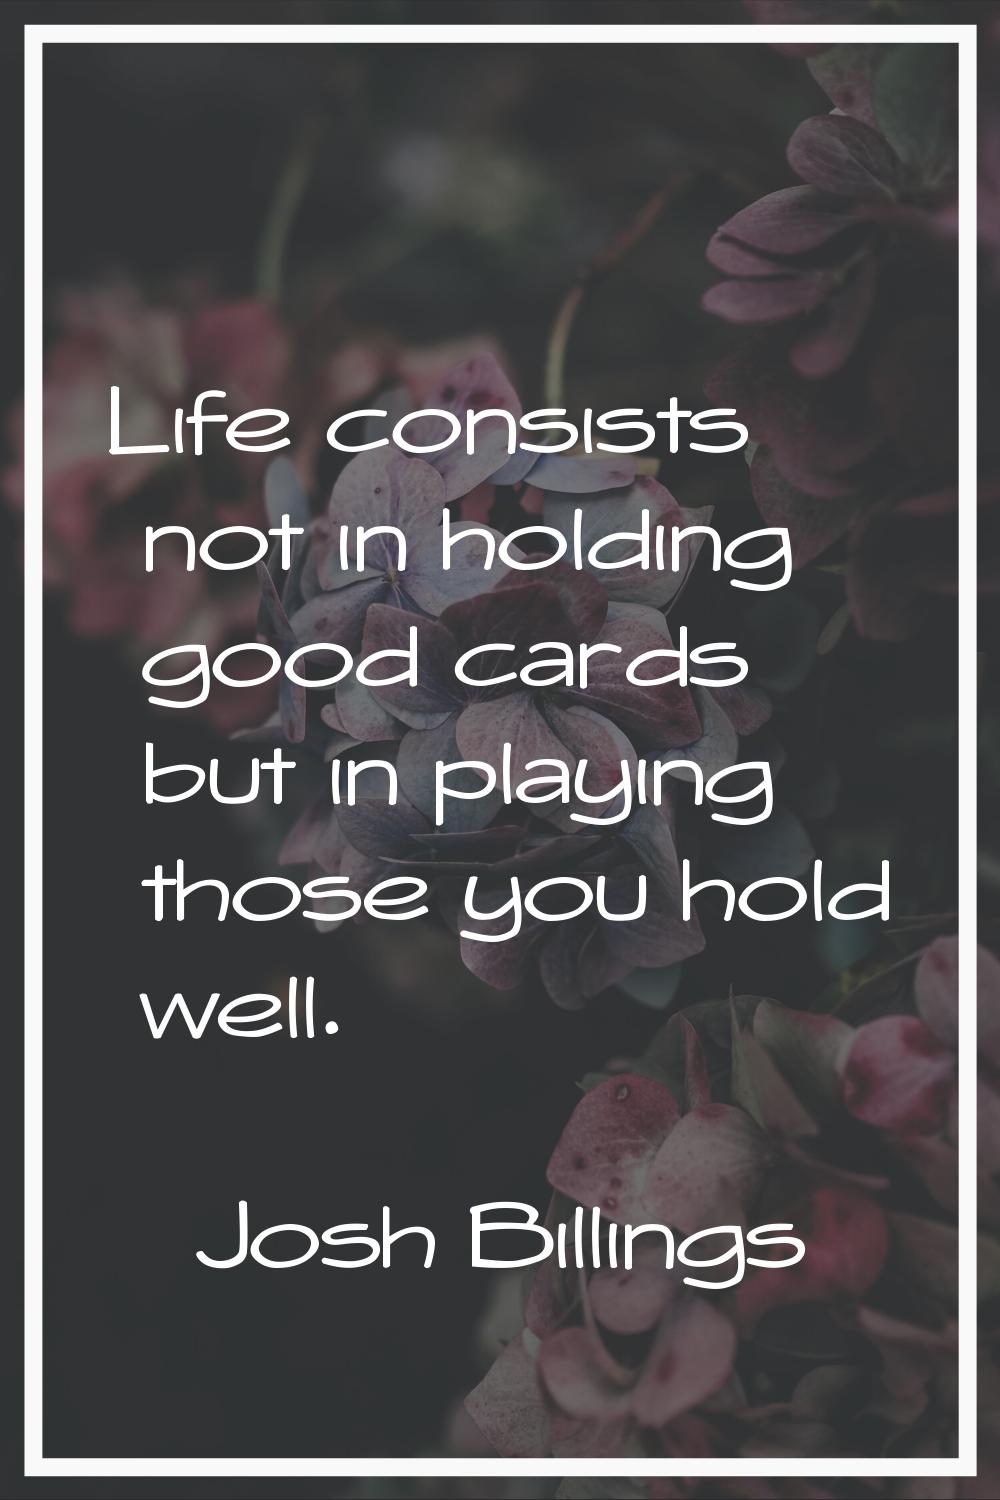 Life consists not in holding good cards but in playing those you hold well.